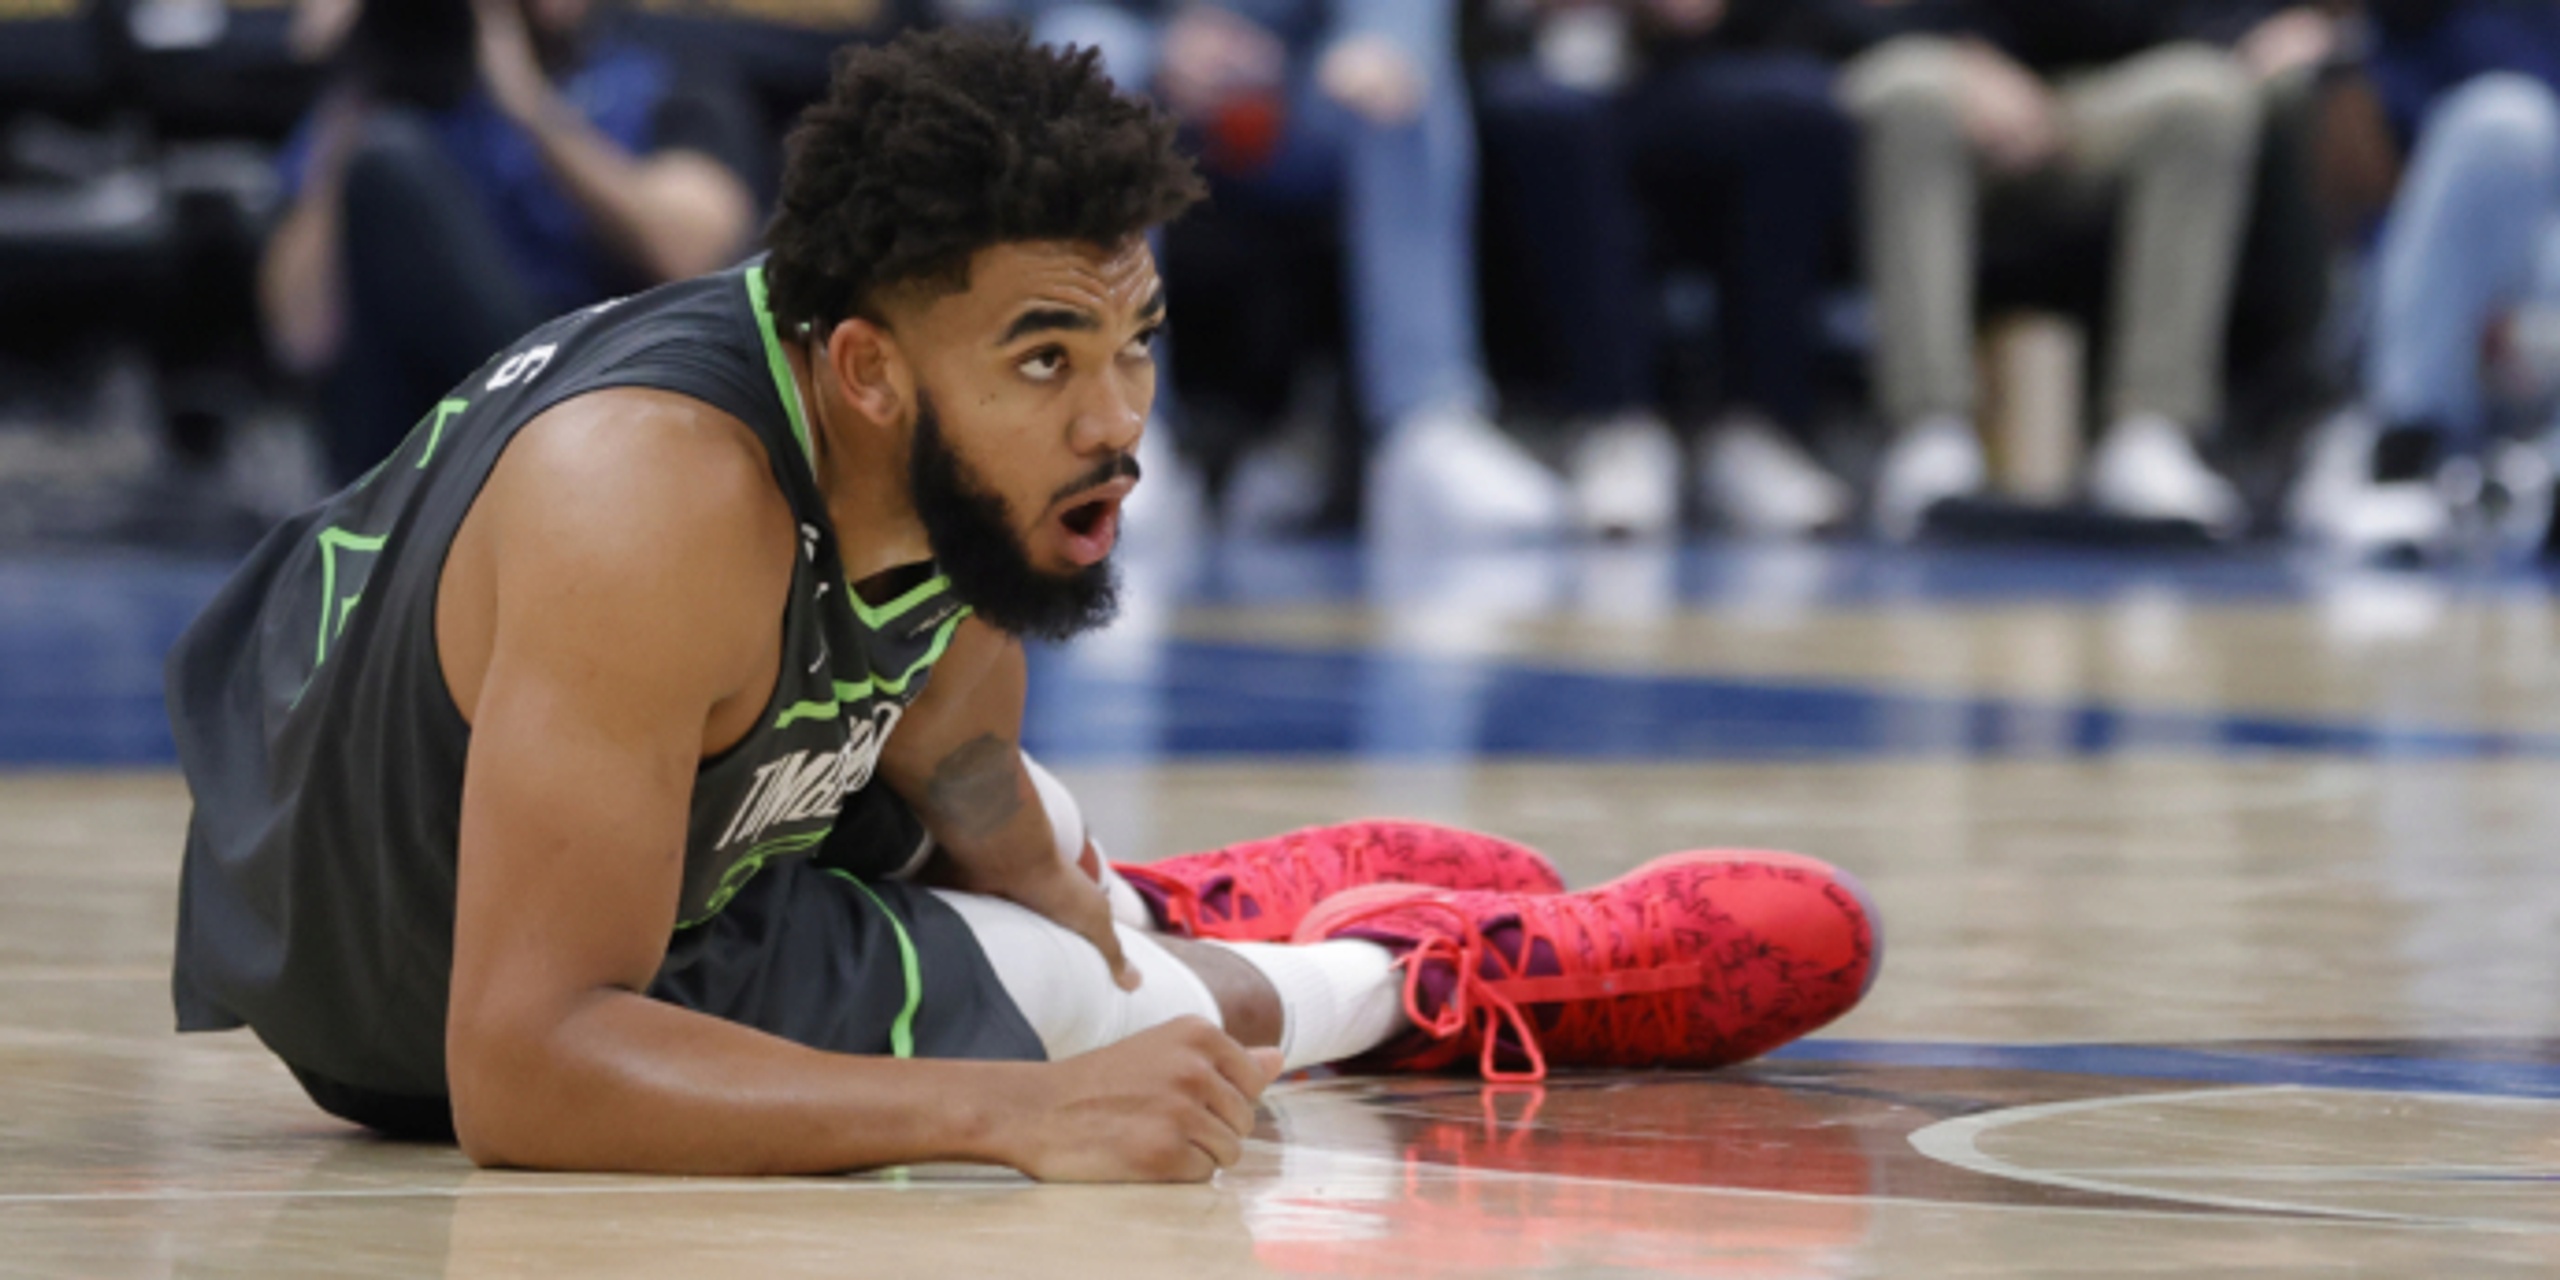 Minnesota star Towns helped off with right leg injury